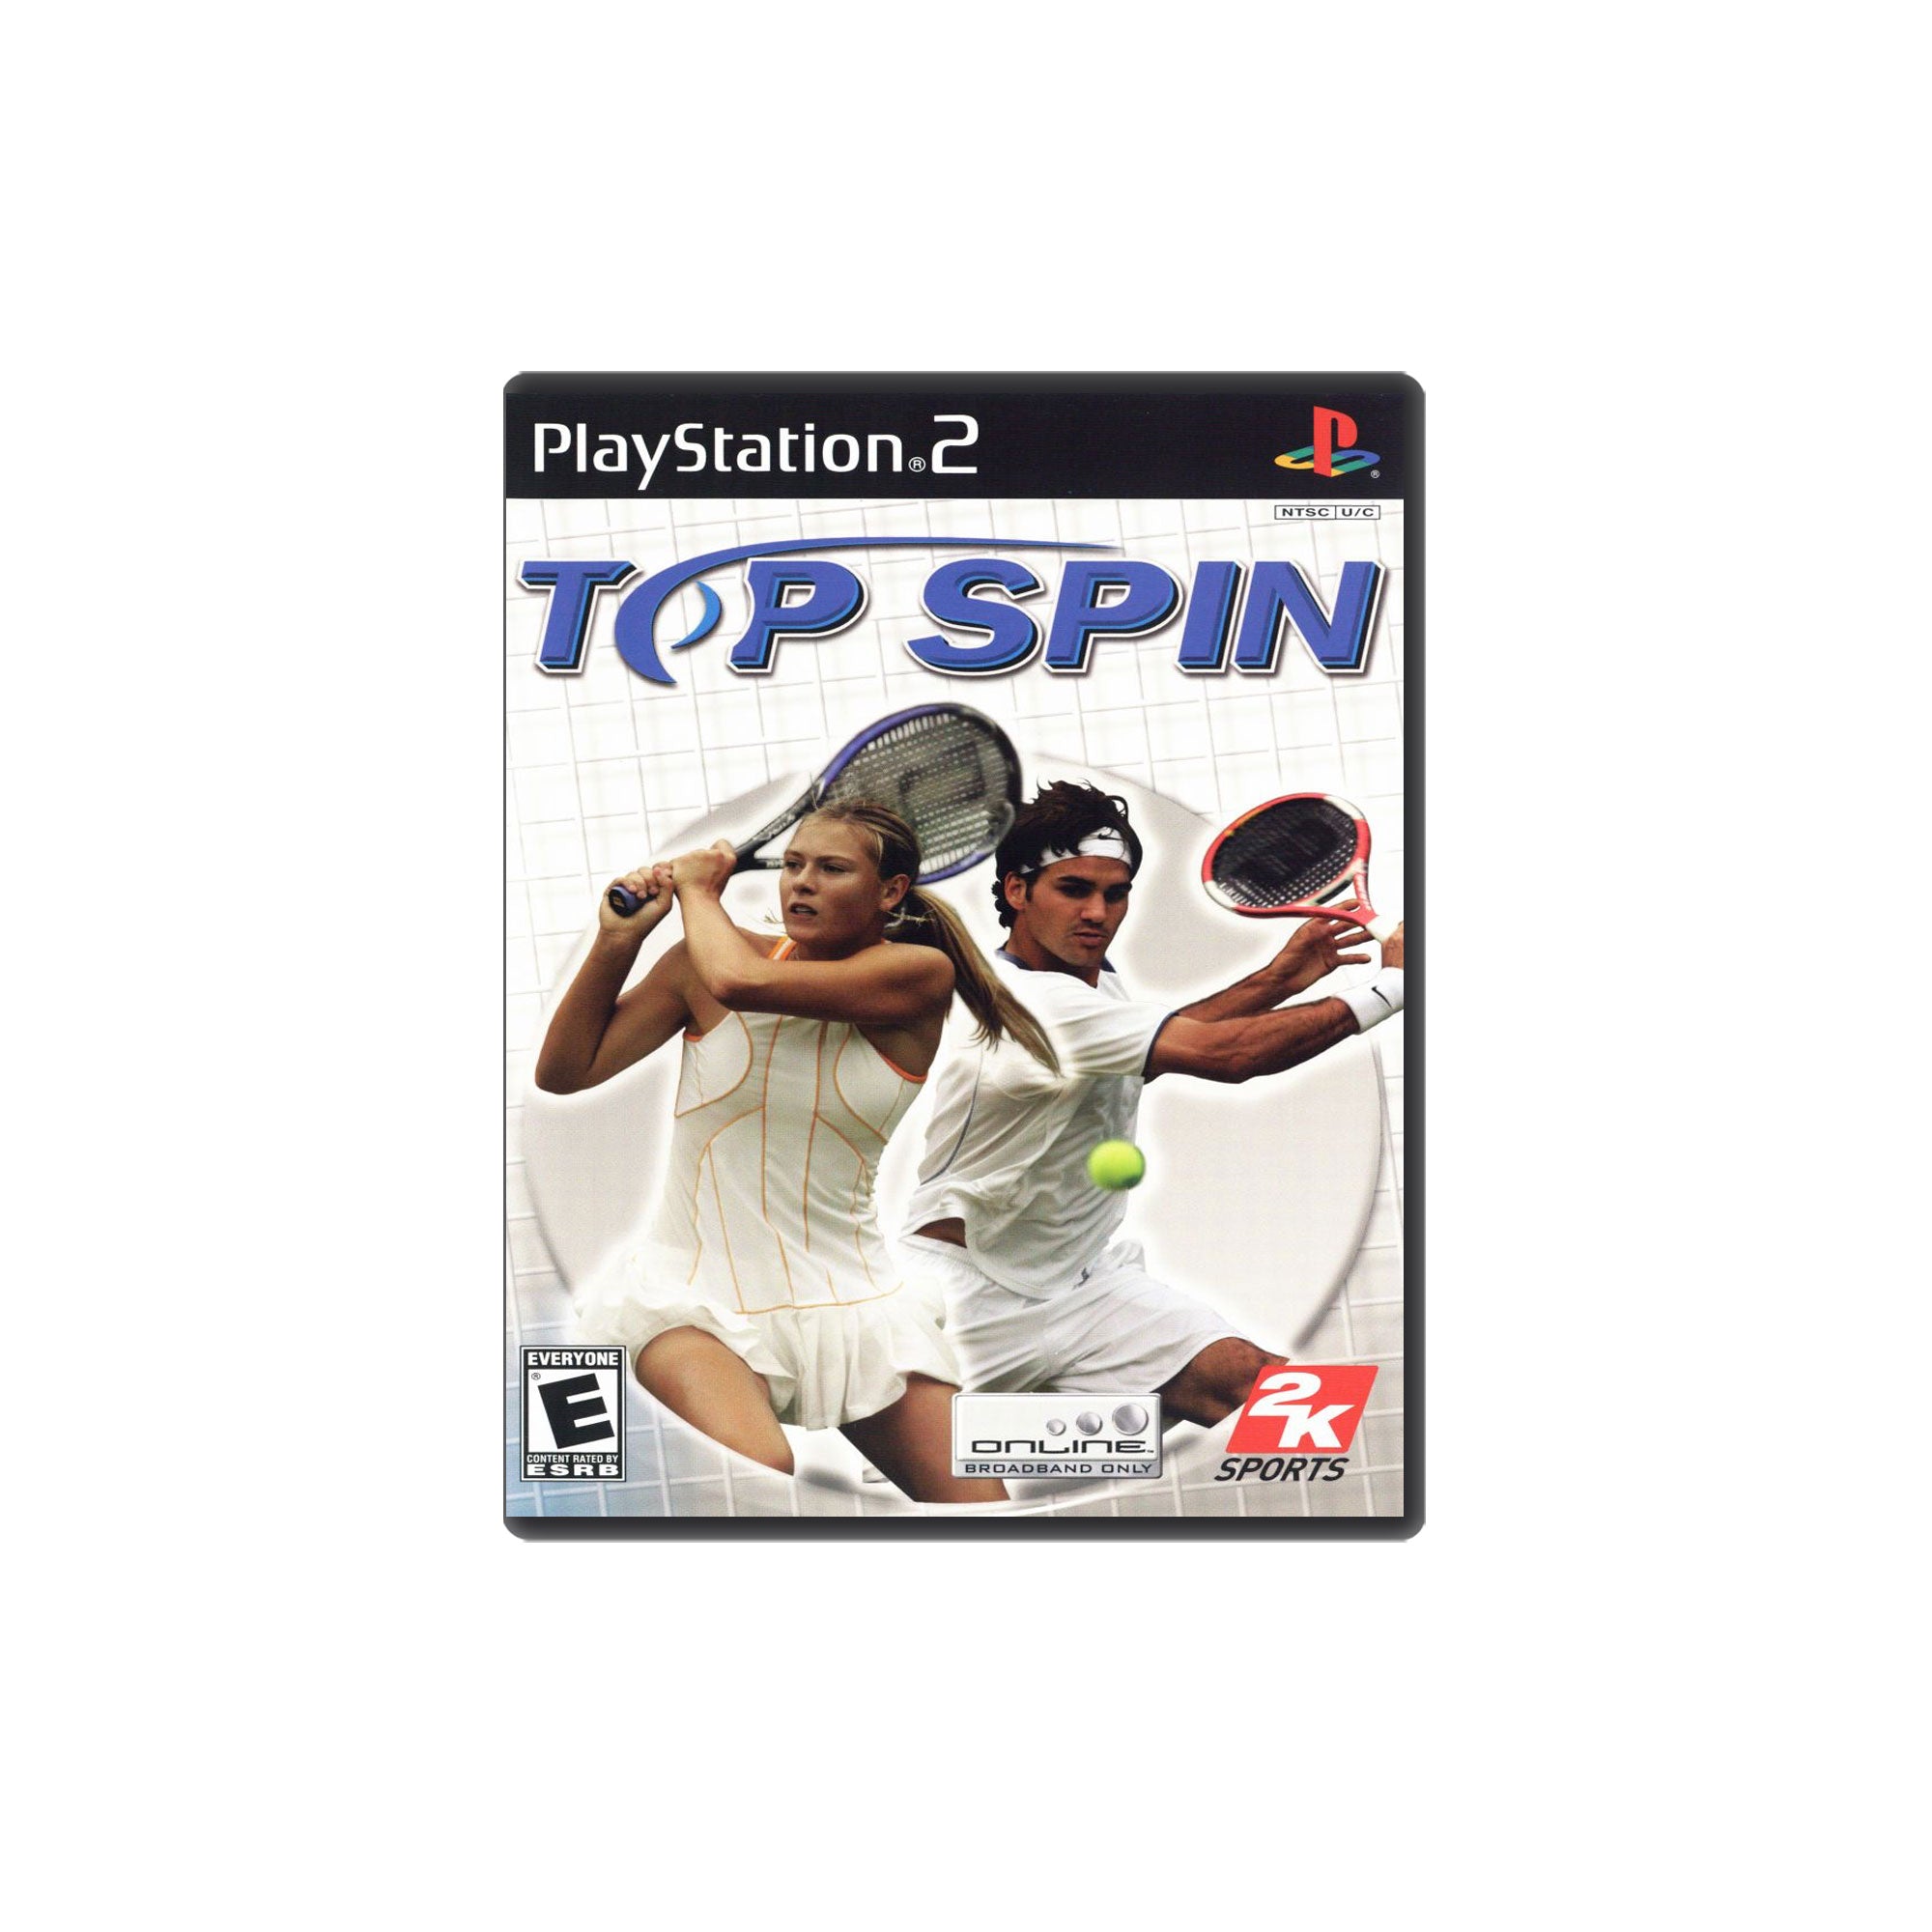 Swifty Games - Top Spin (Playstation 2, 2003)